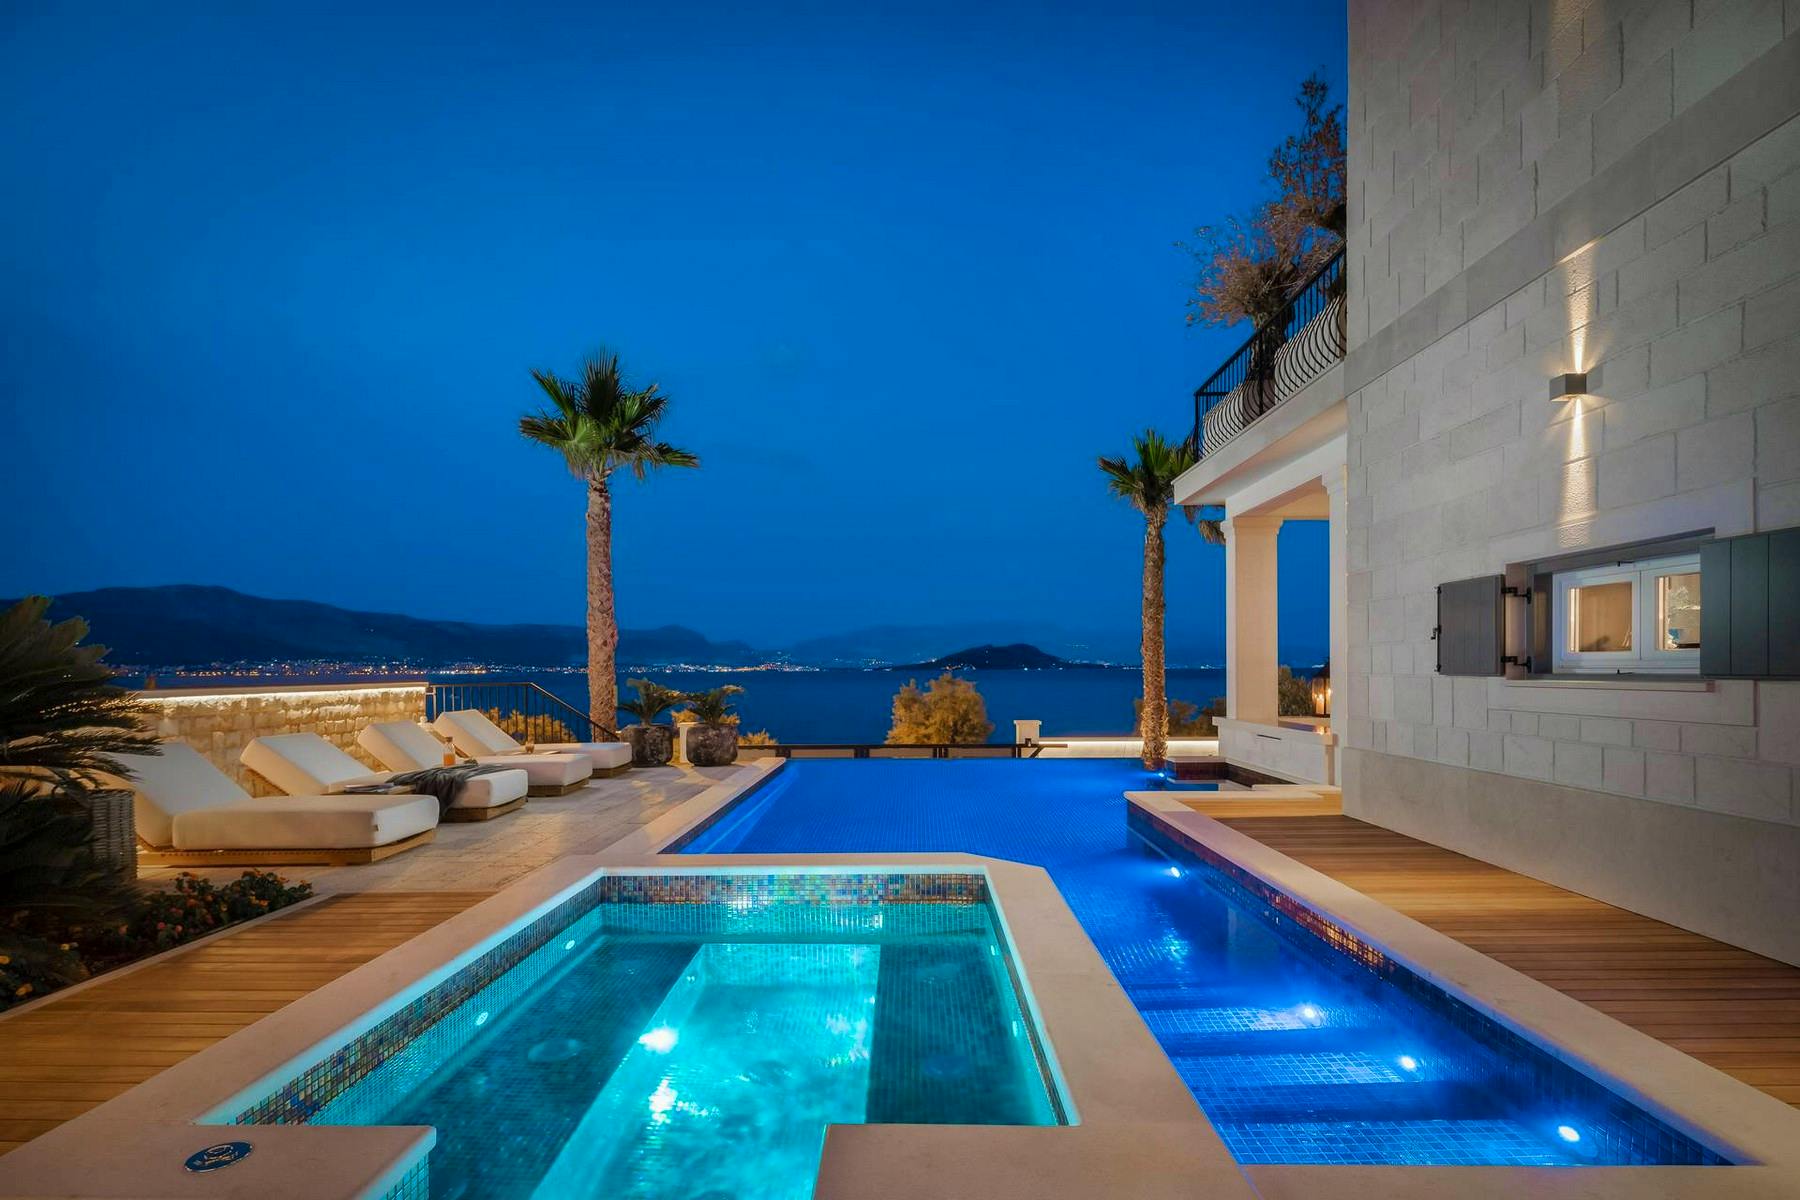 Swimming pool and hot tub with night lighting